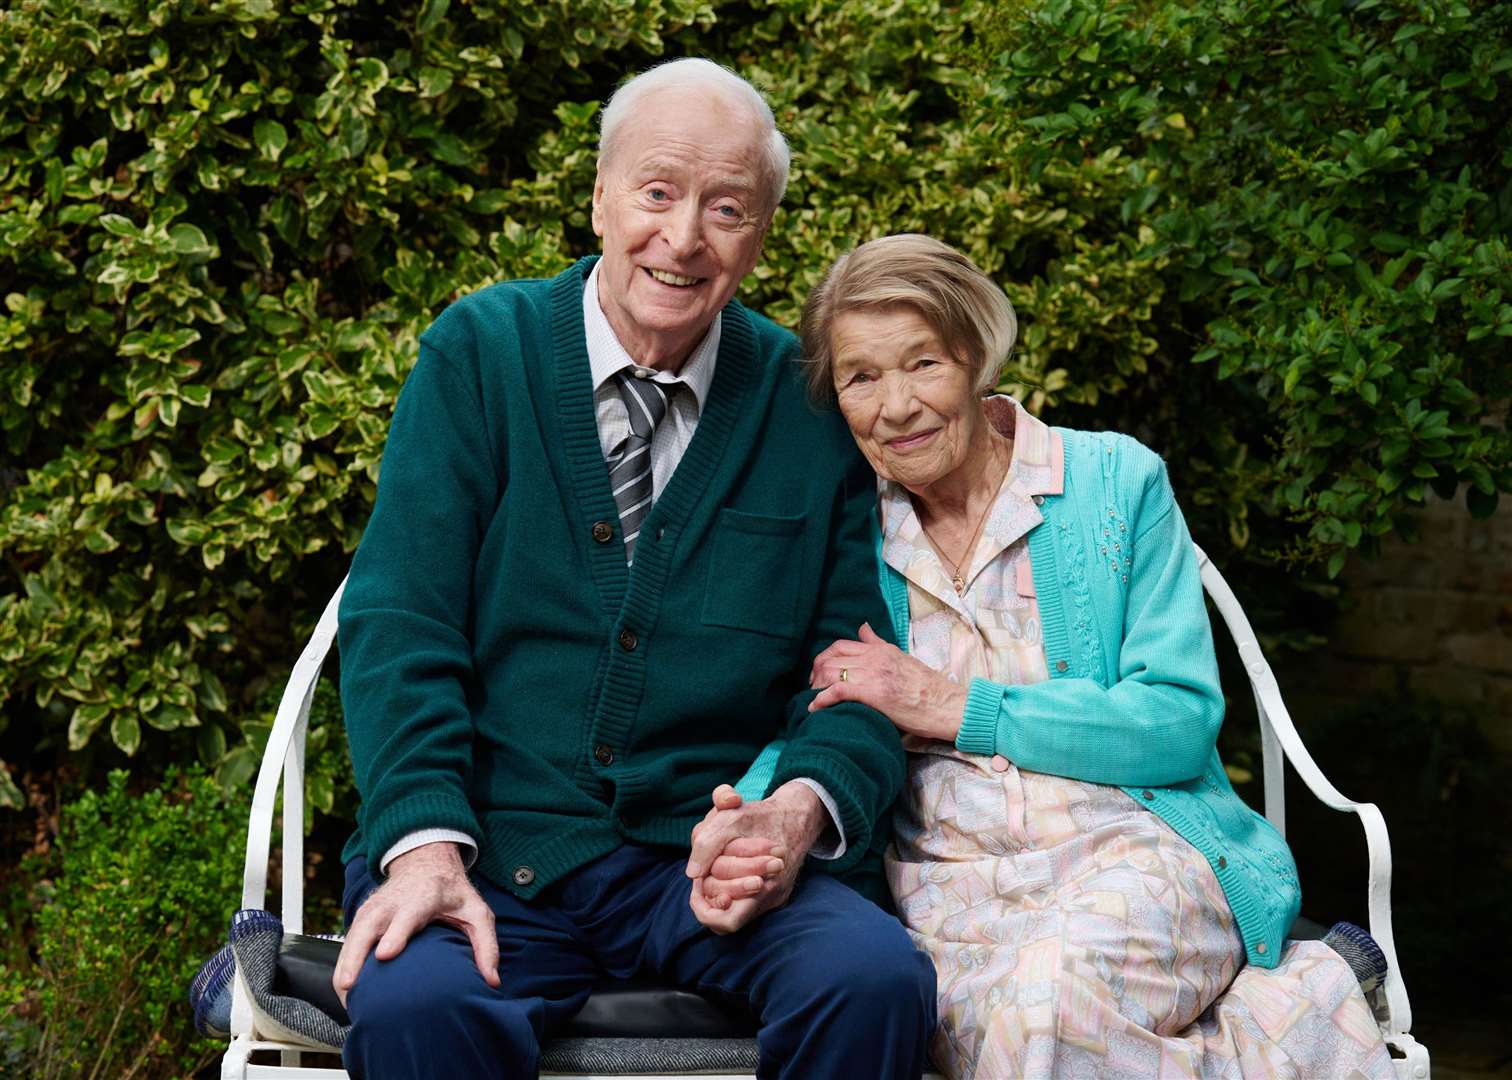 The Great Escaper with Michael Caine as Bernie Jordan and Glenda Jackson as Rene Jordan.Picture: Pathe Film Distribution/Rob Youngson © 2023 PA Media